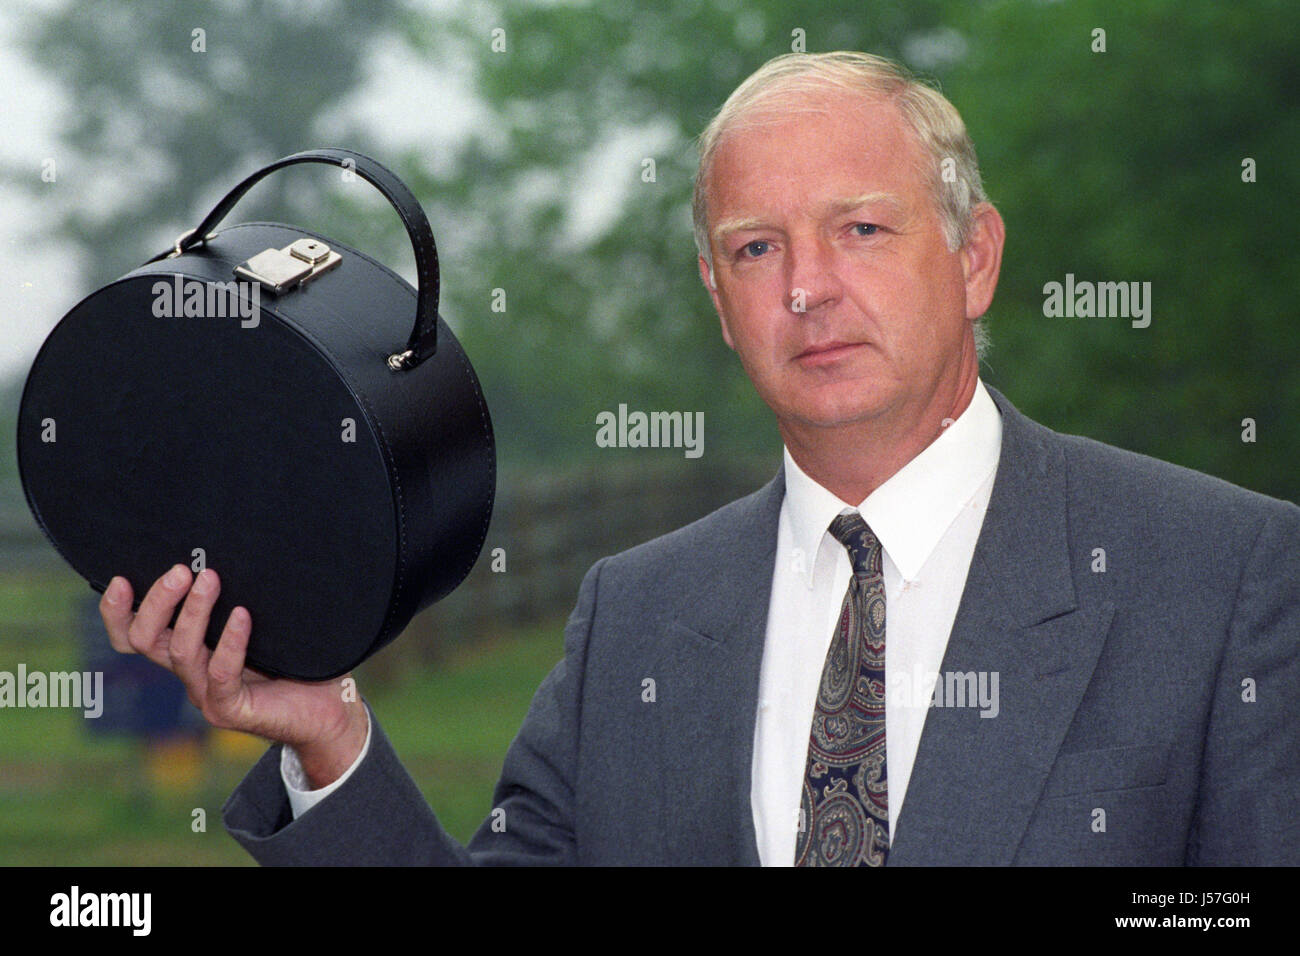 Detective Superintendent Michael Bennison shows a vanity case similar to the one Lynne Rogers was carrying when she went missing and which has not been found. Stock Photo